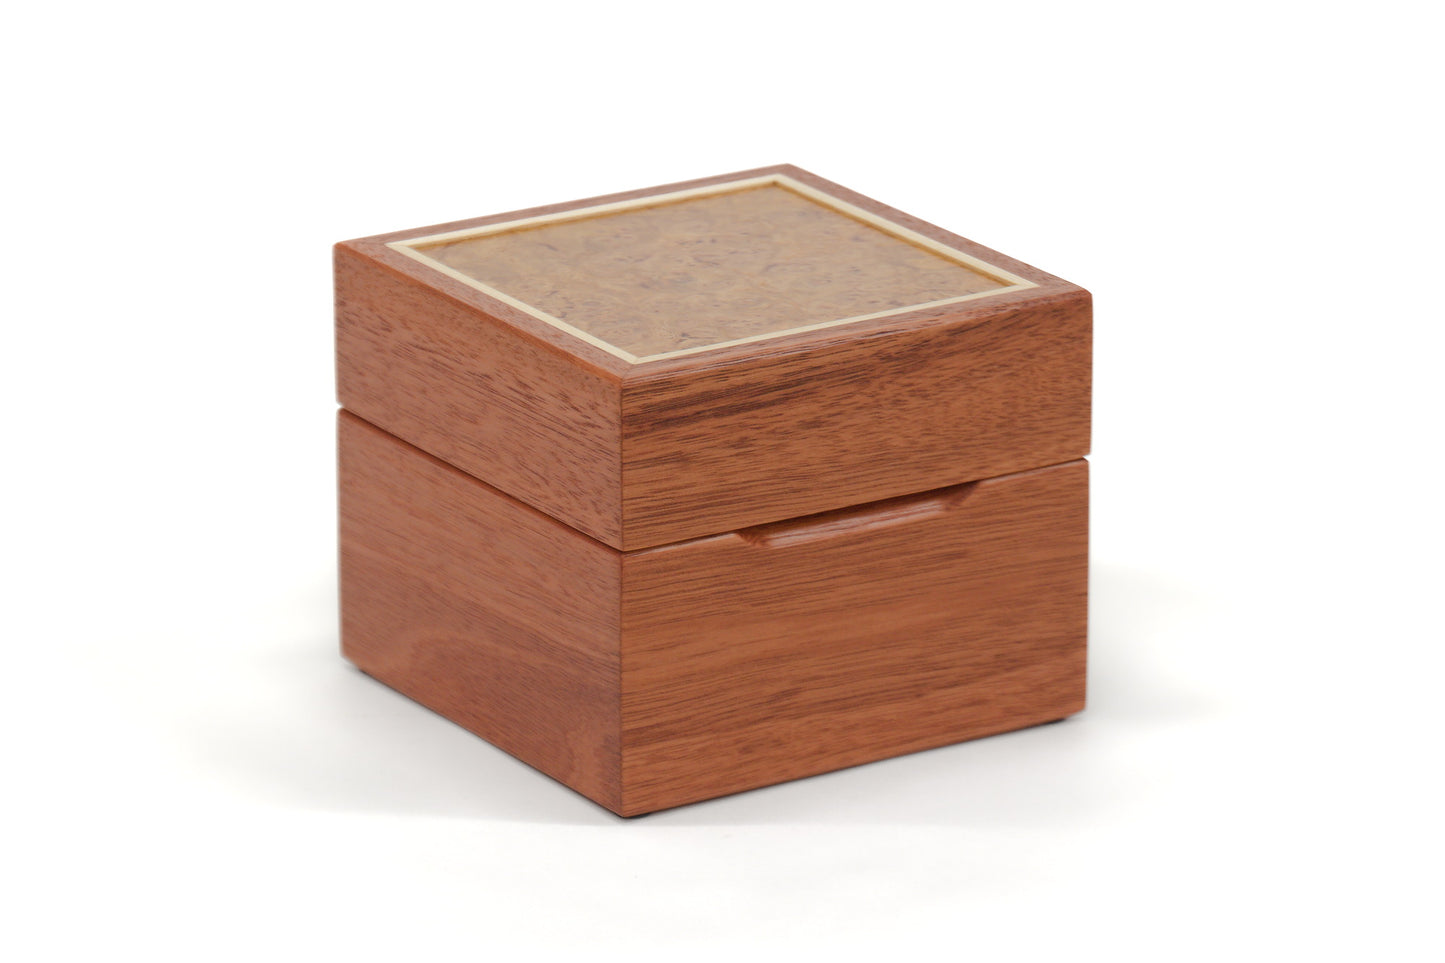 Products Watch Box One - Jarrah and Maple Burl